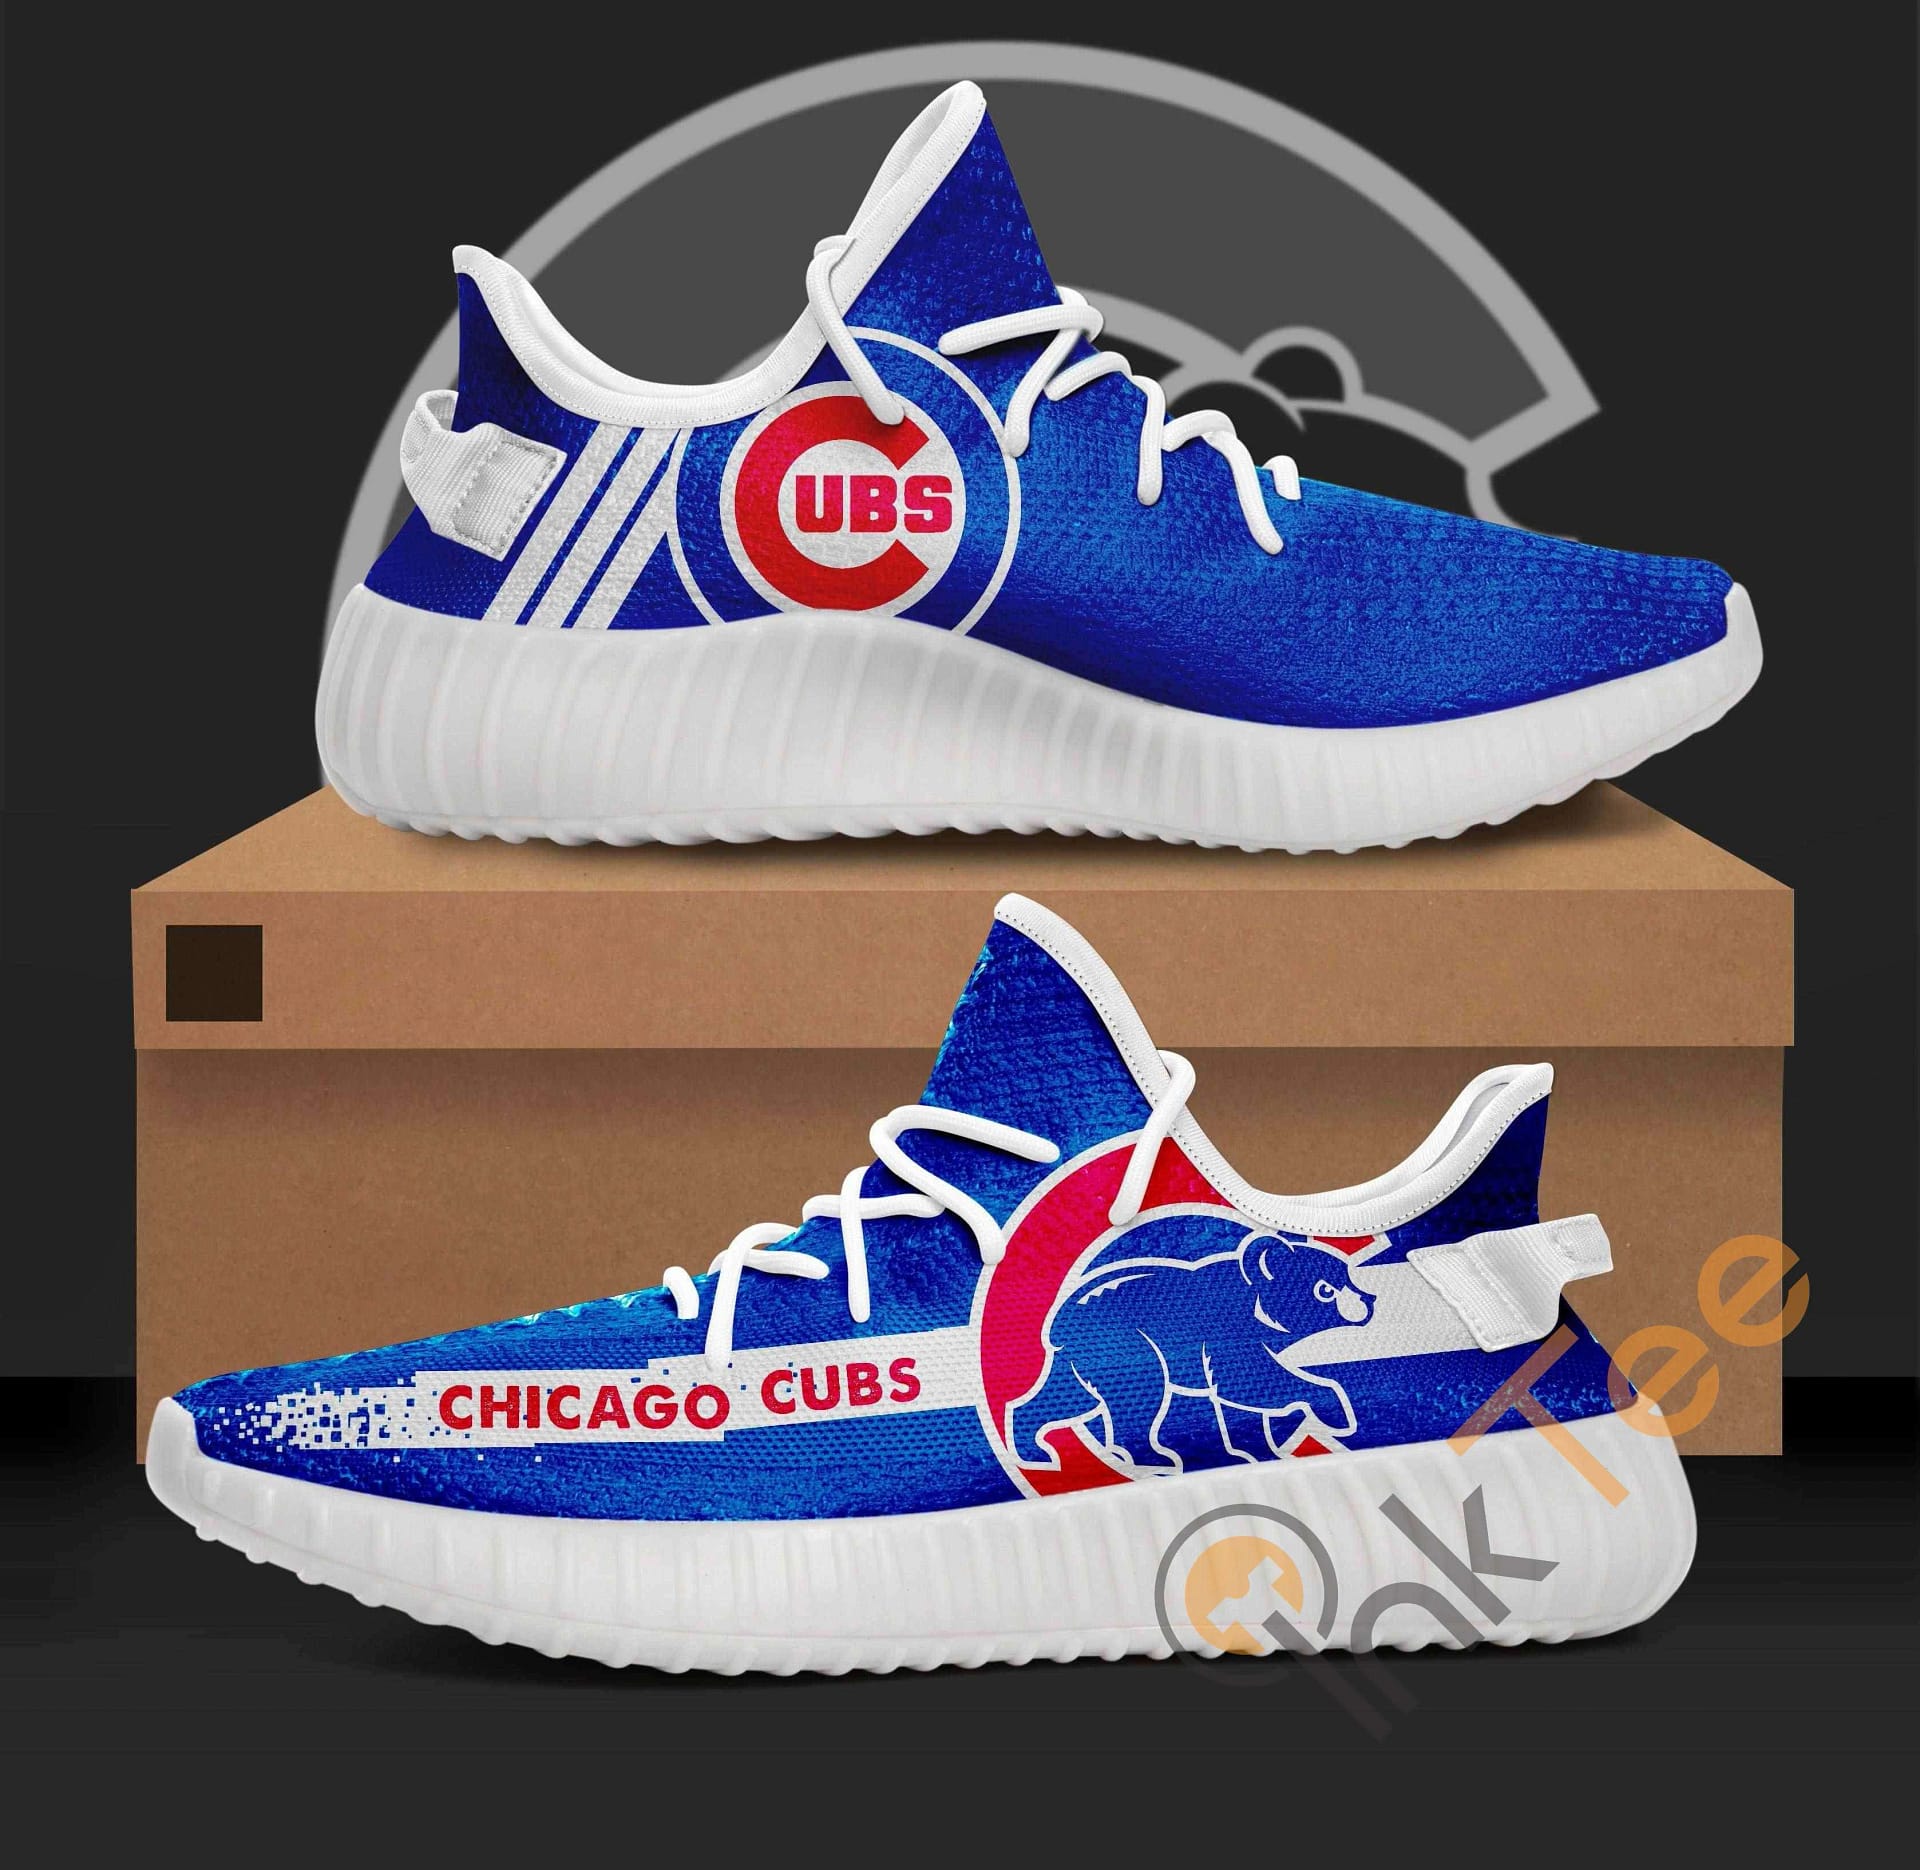 Chicago Cubs Mlb Teams Amazon Best Selling Yeezy Boost